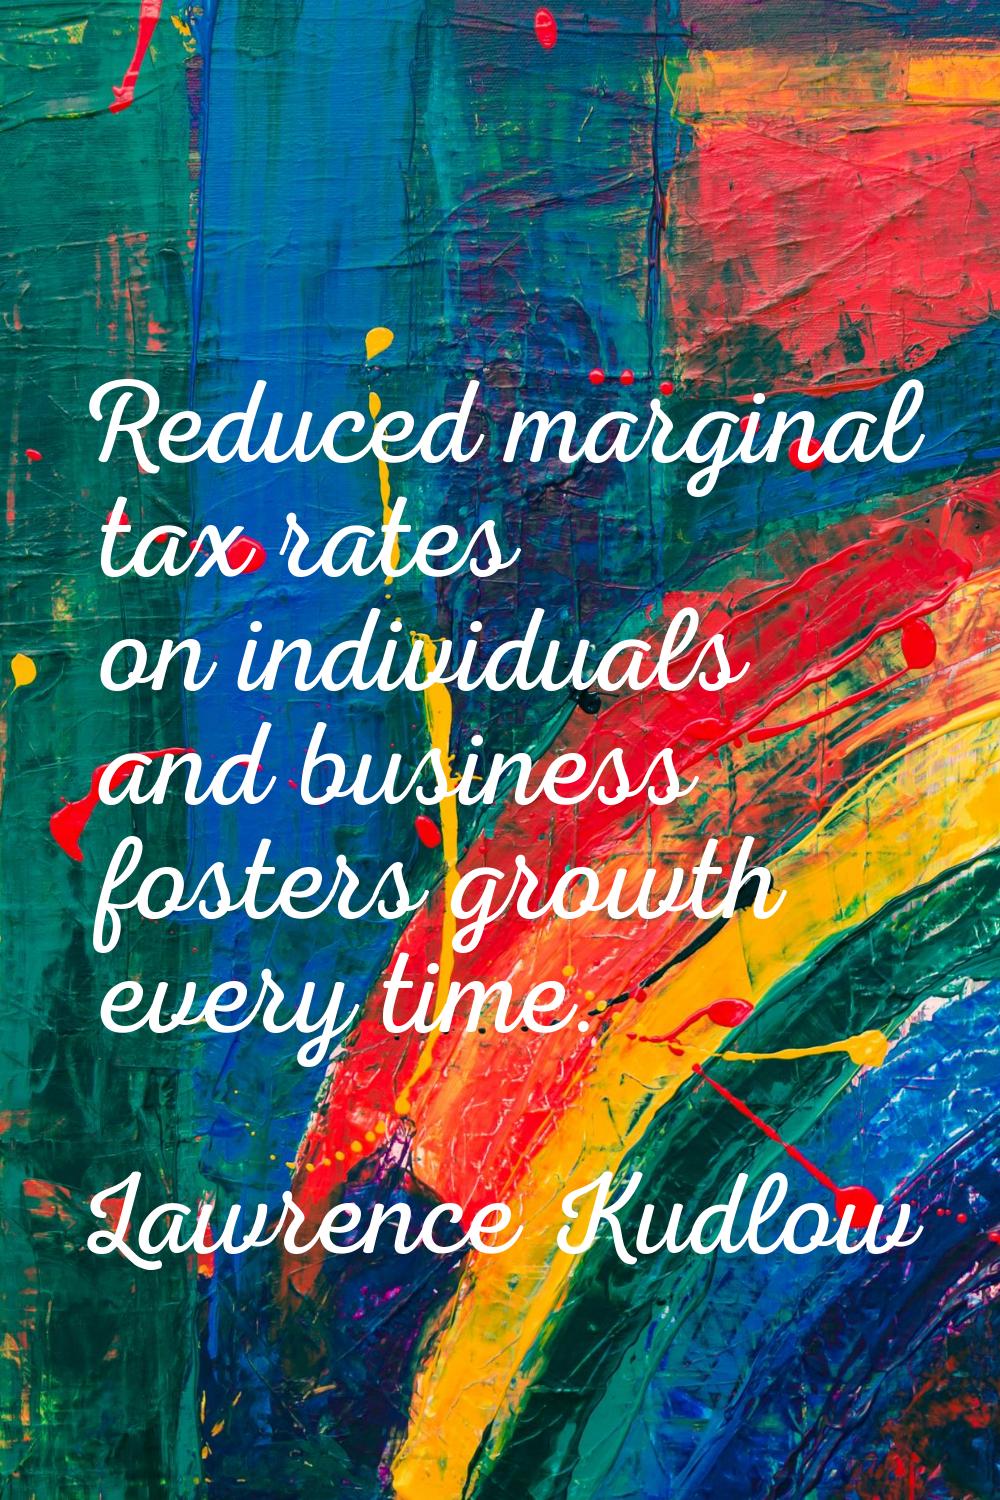 Reduced marginal tax rates on individuals and business fosters growth every time.